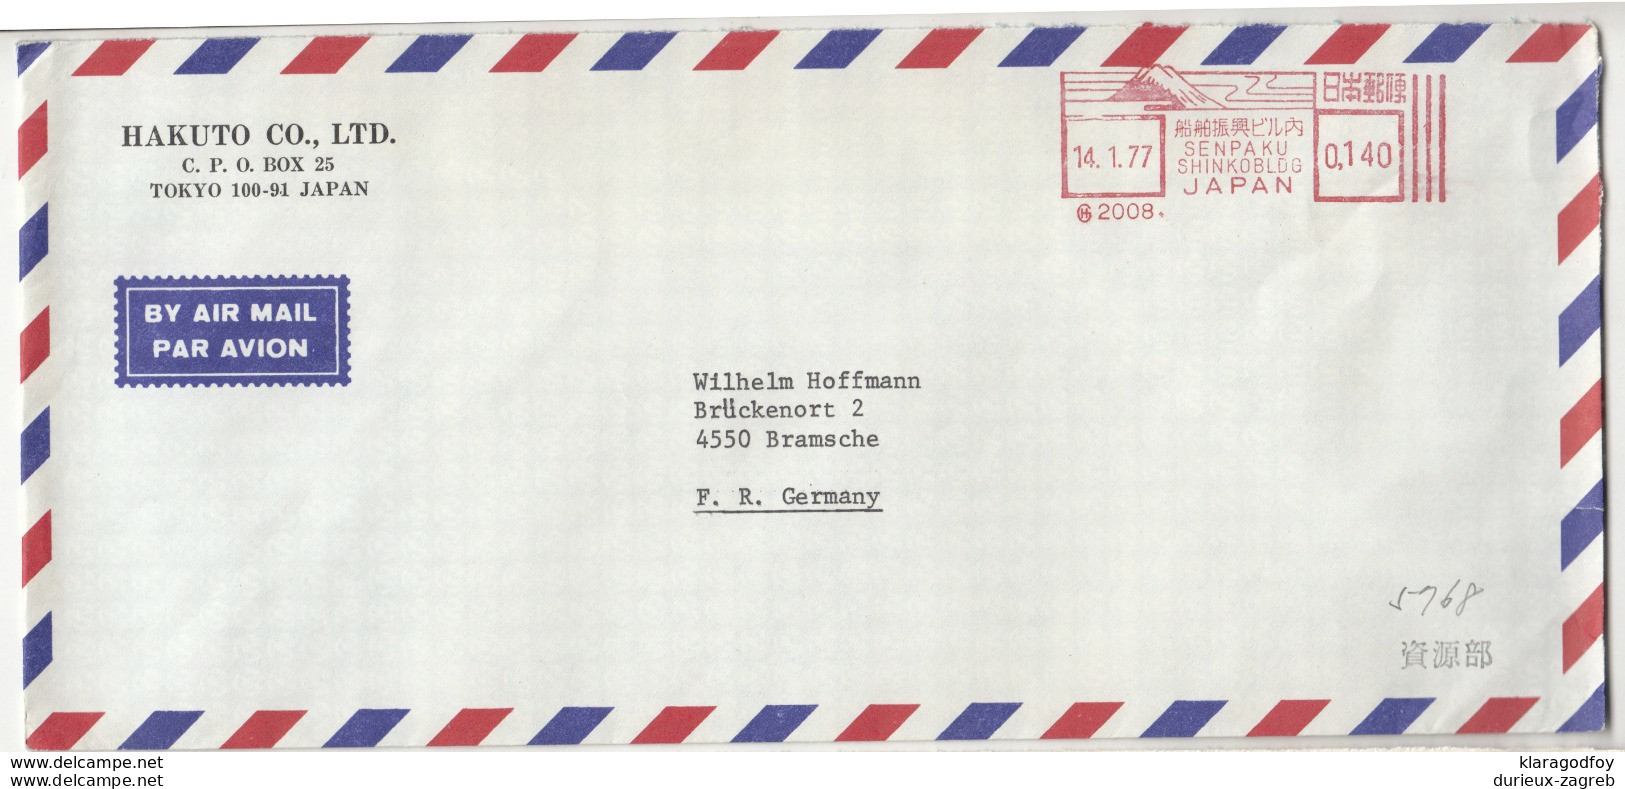 Hakuto Co., Tokyo Company Air Mail Letter Cover Travelled 1977 To Germany - Senpaku Shinkoblog Meter Stamp B190922 - Lettres & Documents